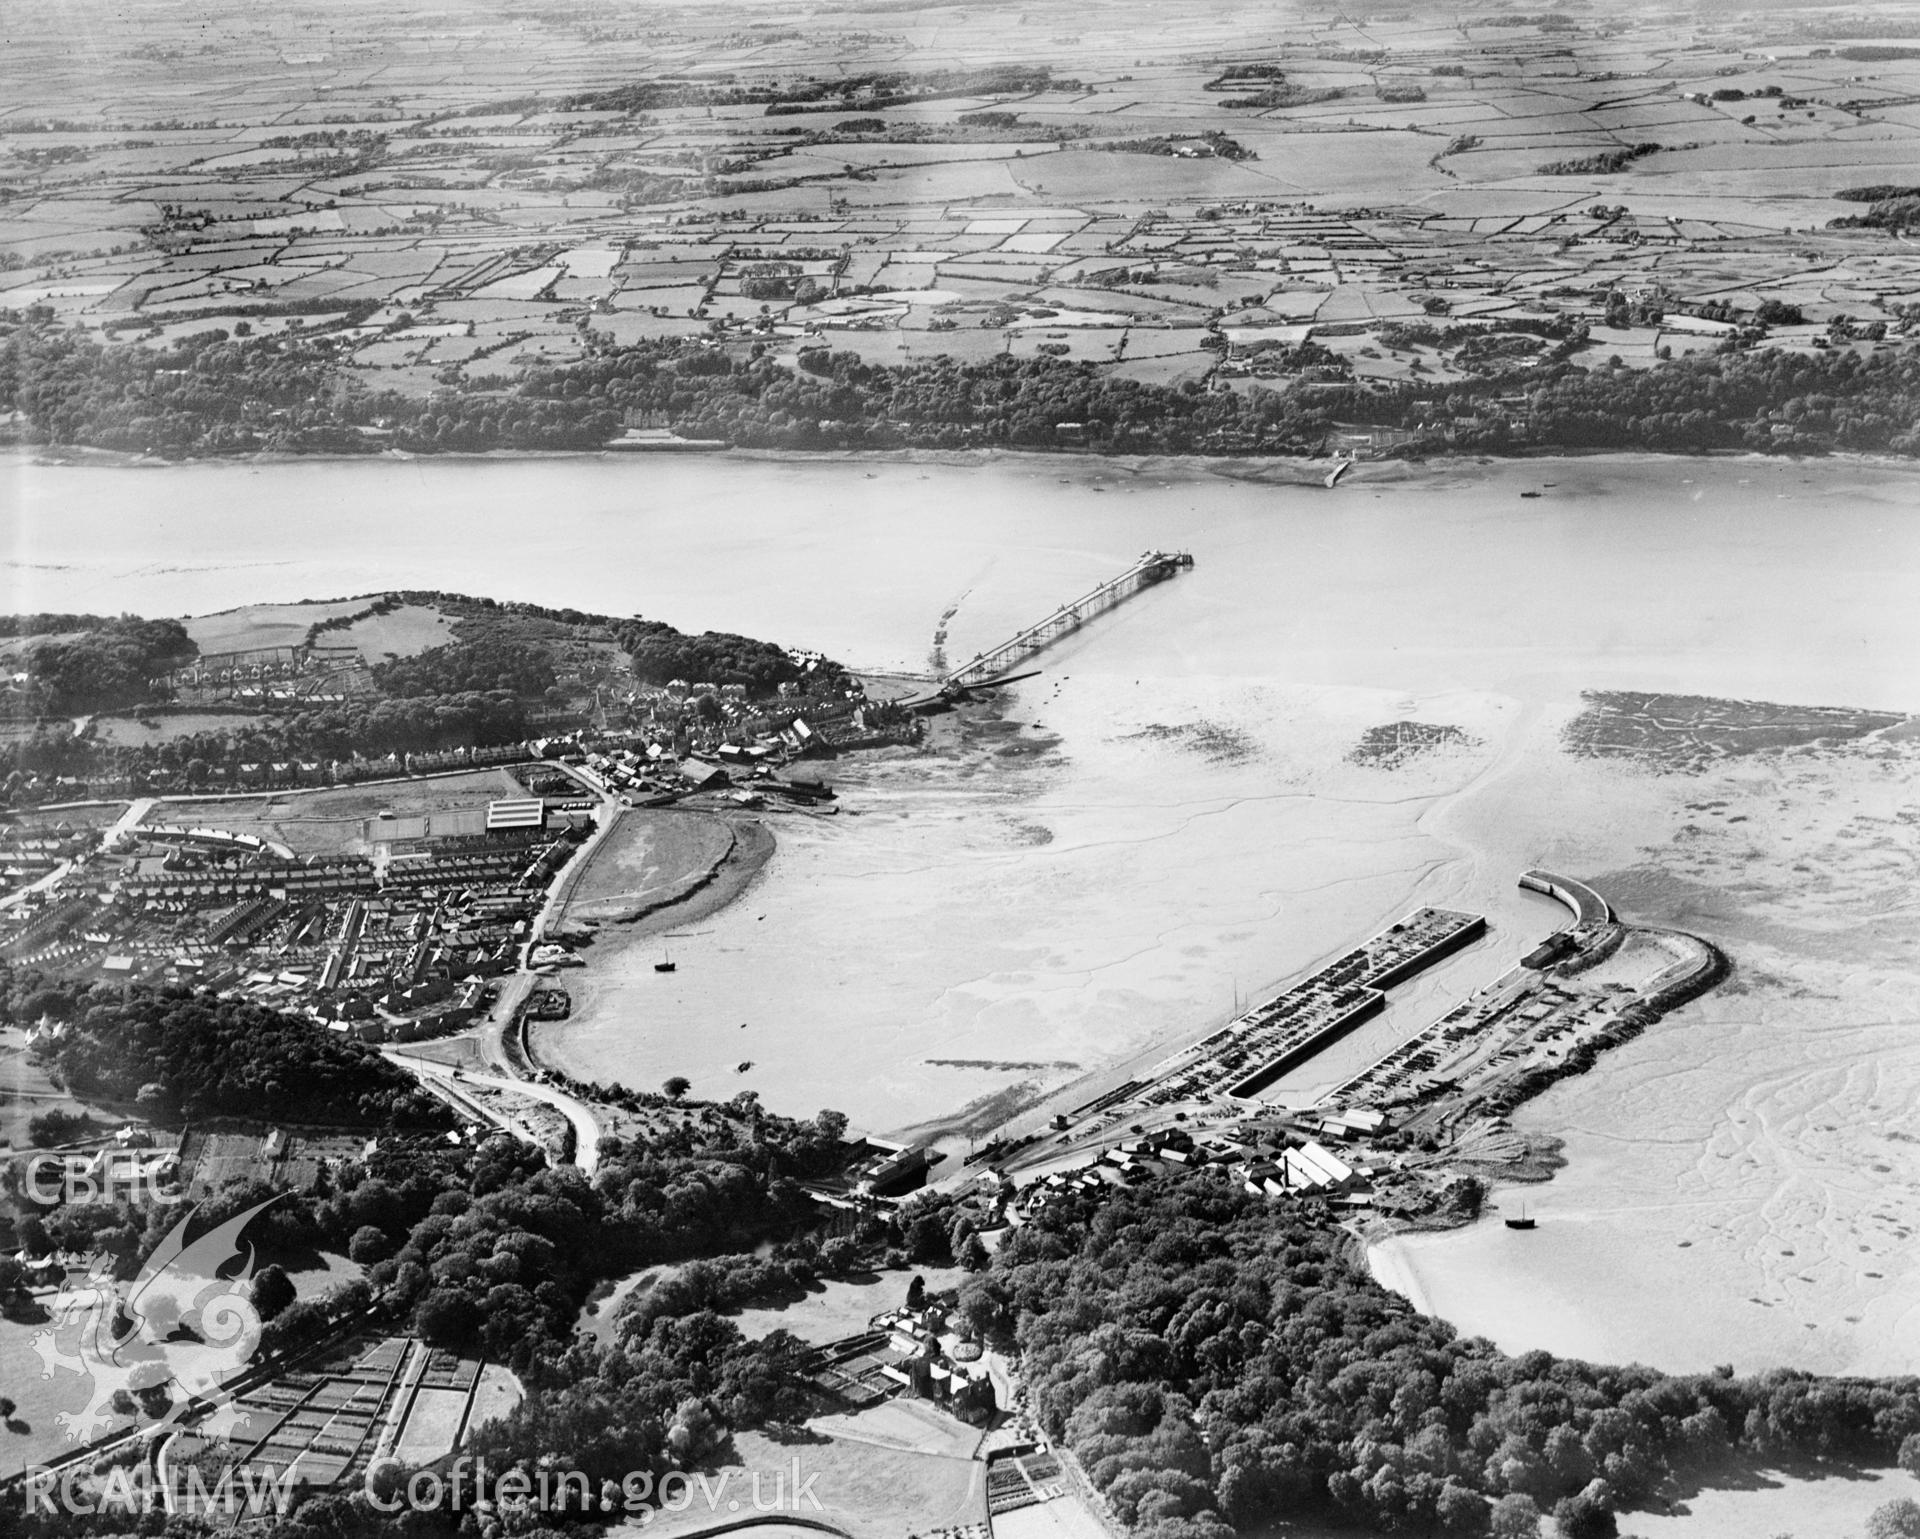 View of Bangor showing harbour, oblique aerial view. 5?x4? black and white glass plate negative.